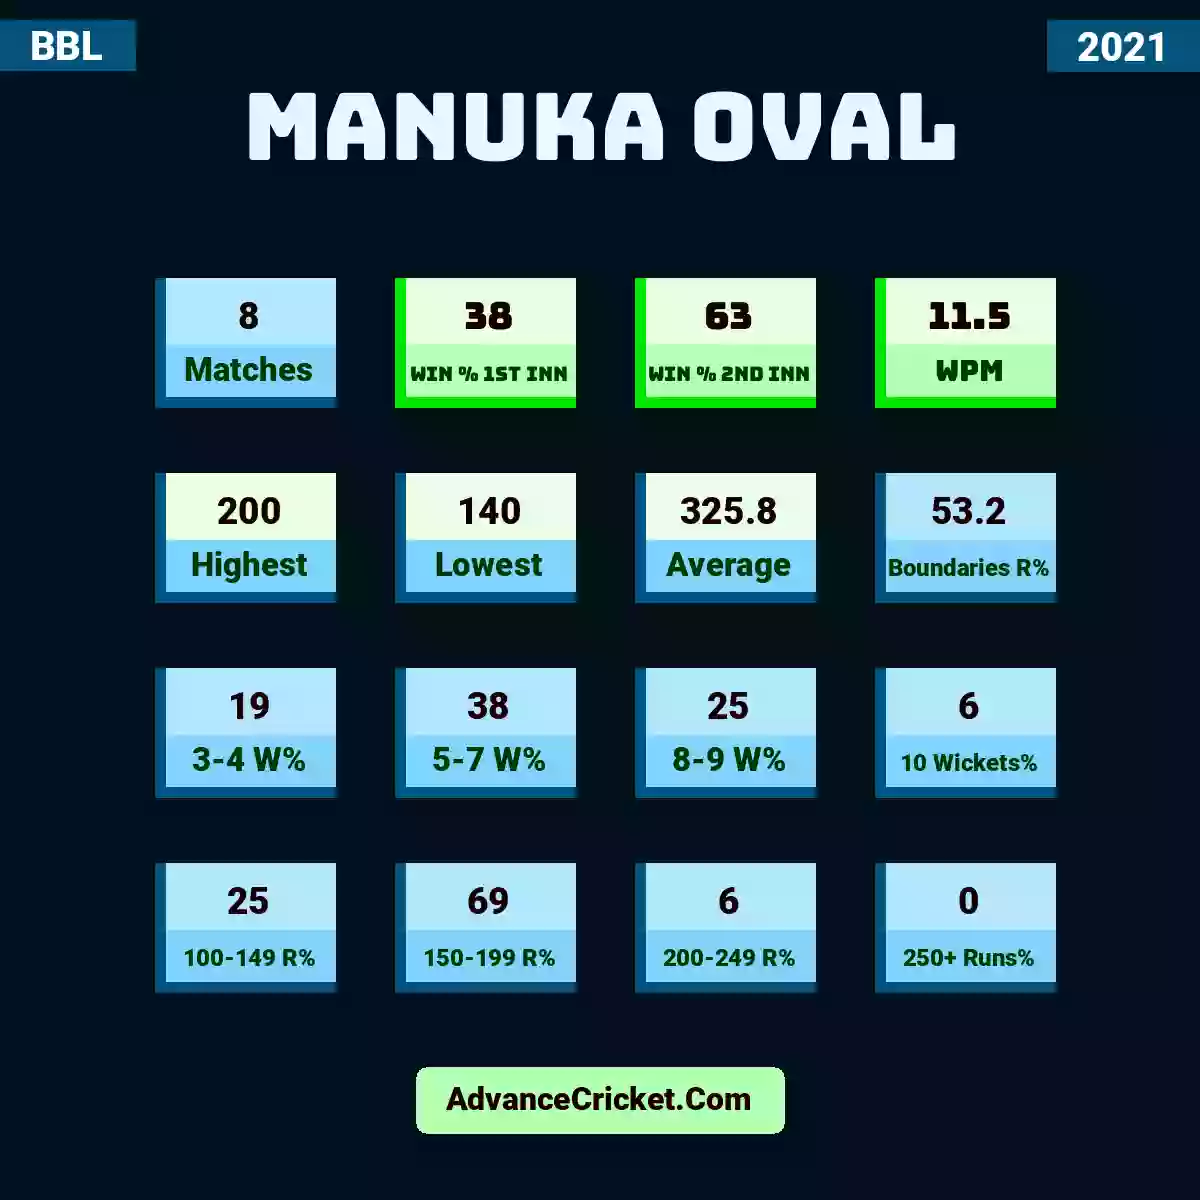 Image showing Manuka Oval with Matches: 8, Win % 1st Inn: 38, Win % 2nd Inn: 63, WPM: 11.5, Highest: 200, Lowest: 140, Average: 325.8, Boundaries R%: 53.2, 3-4 W%: 19, 5-7 W%: 38, 8-9 W%: 25, 10 Wickets%: 6, 100-149 R%: 25, 150-199 R%: 69, 200-249 R%: 6, 250+ Runs%: 0.